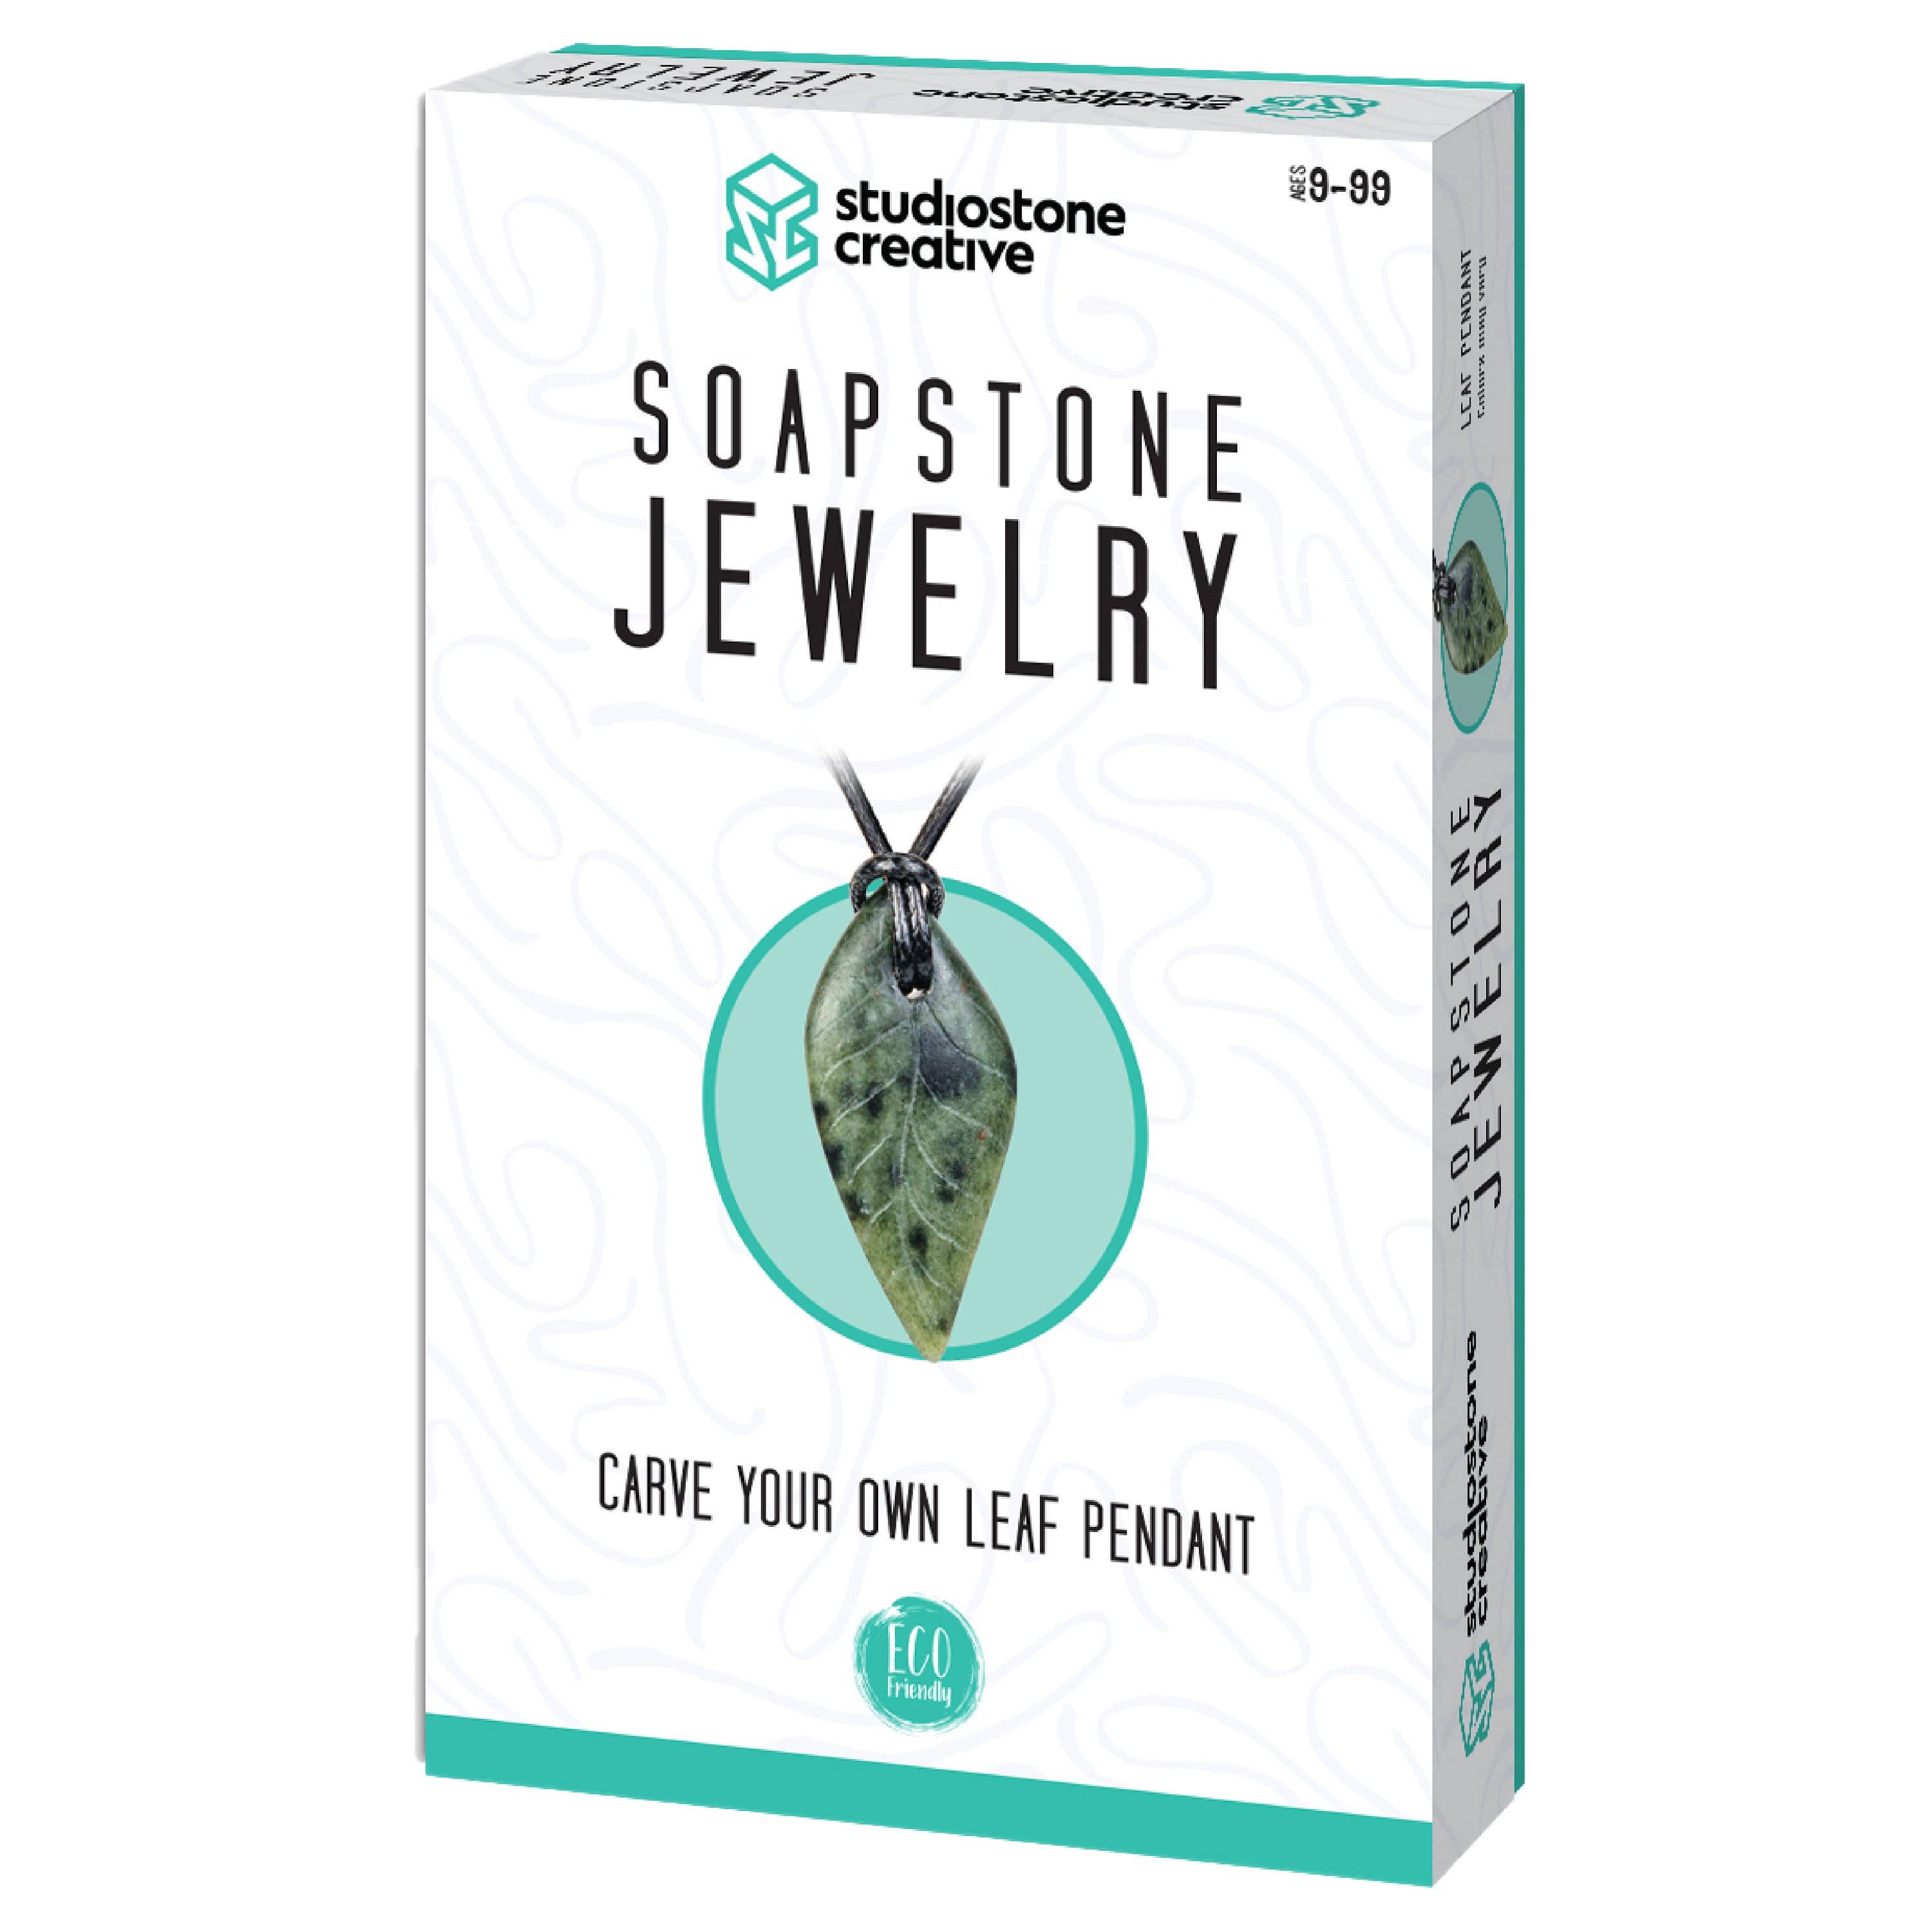 Studiostone Creative - NEW! Leaf Soapstone Pendant Jewelry Kit Carving and Whittling - DIY Stone Necklace Arts and Craft Kit. For kids and adults 9 to 99+ Years.